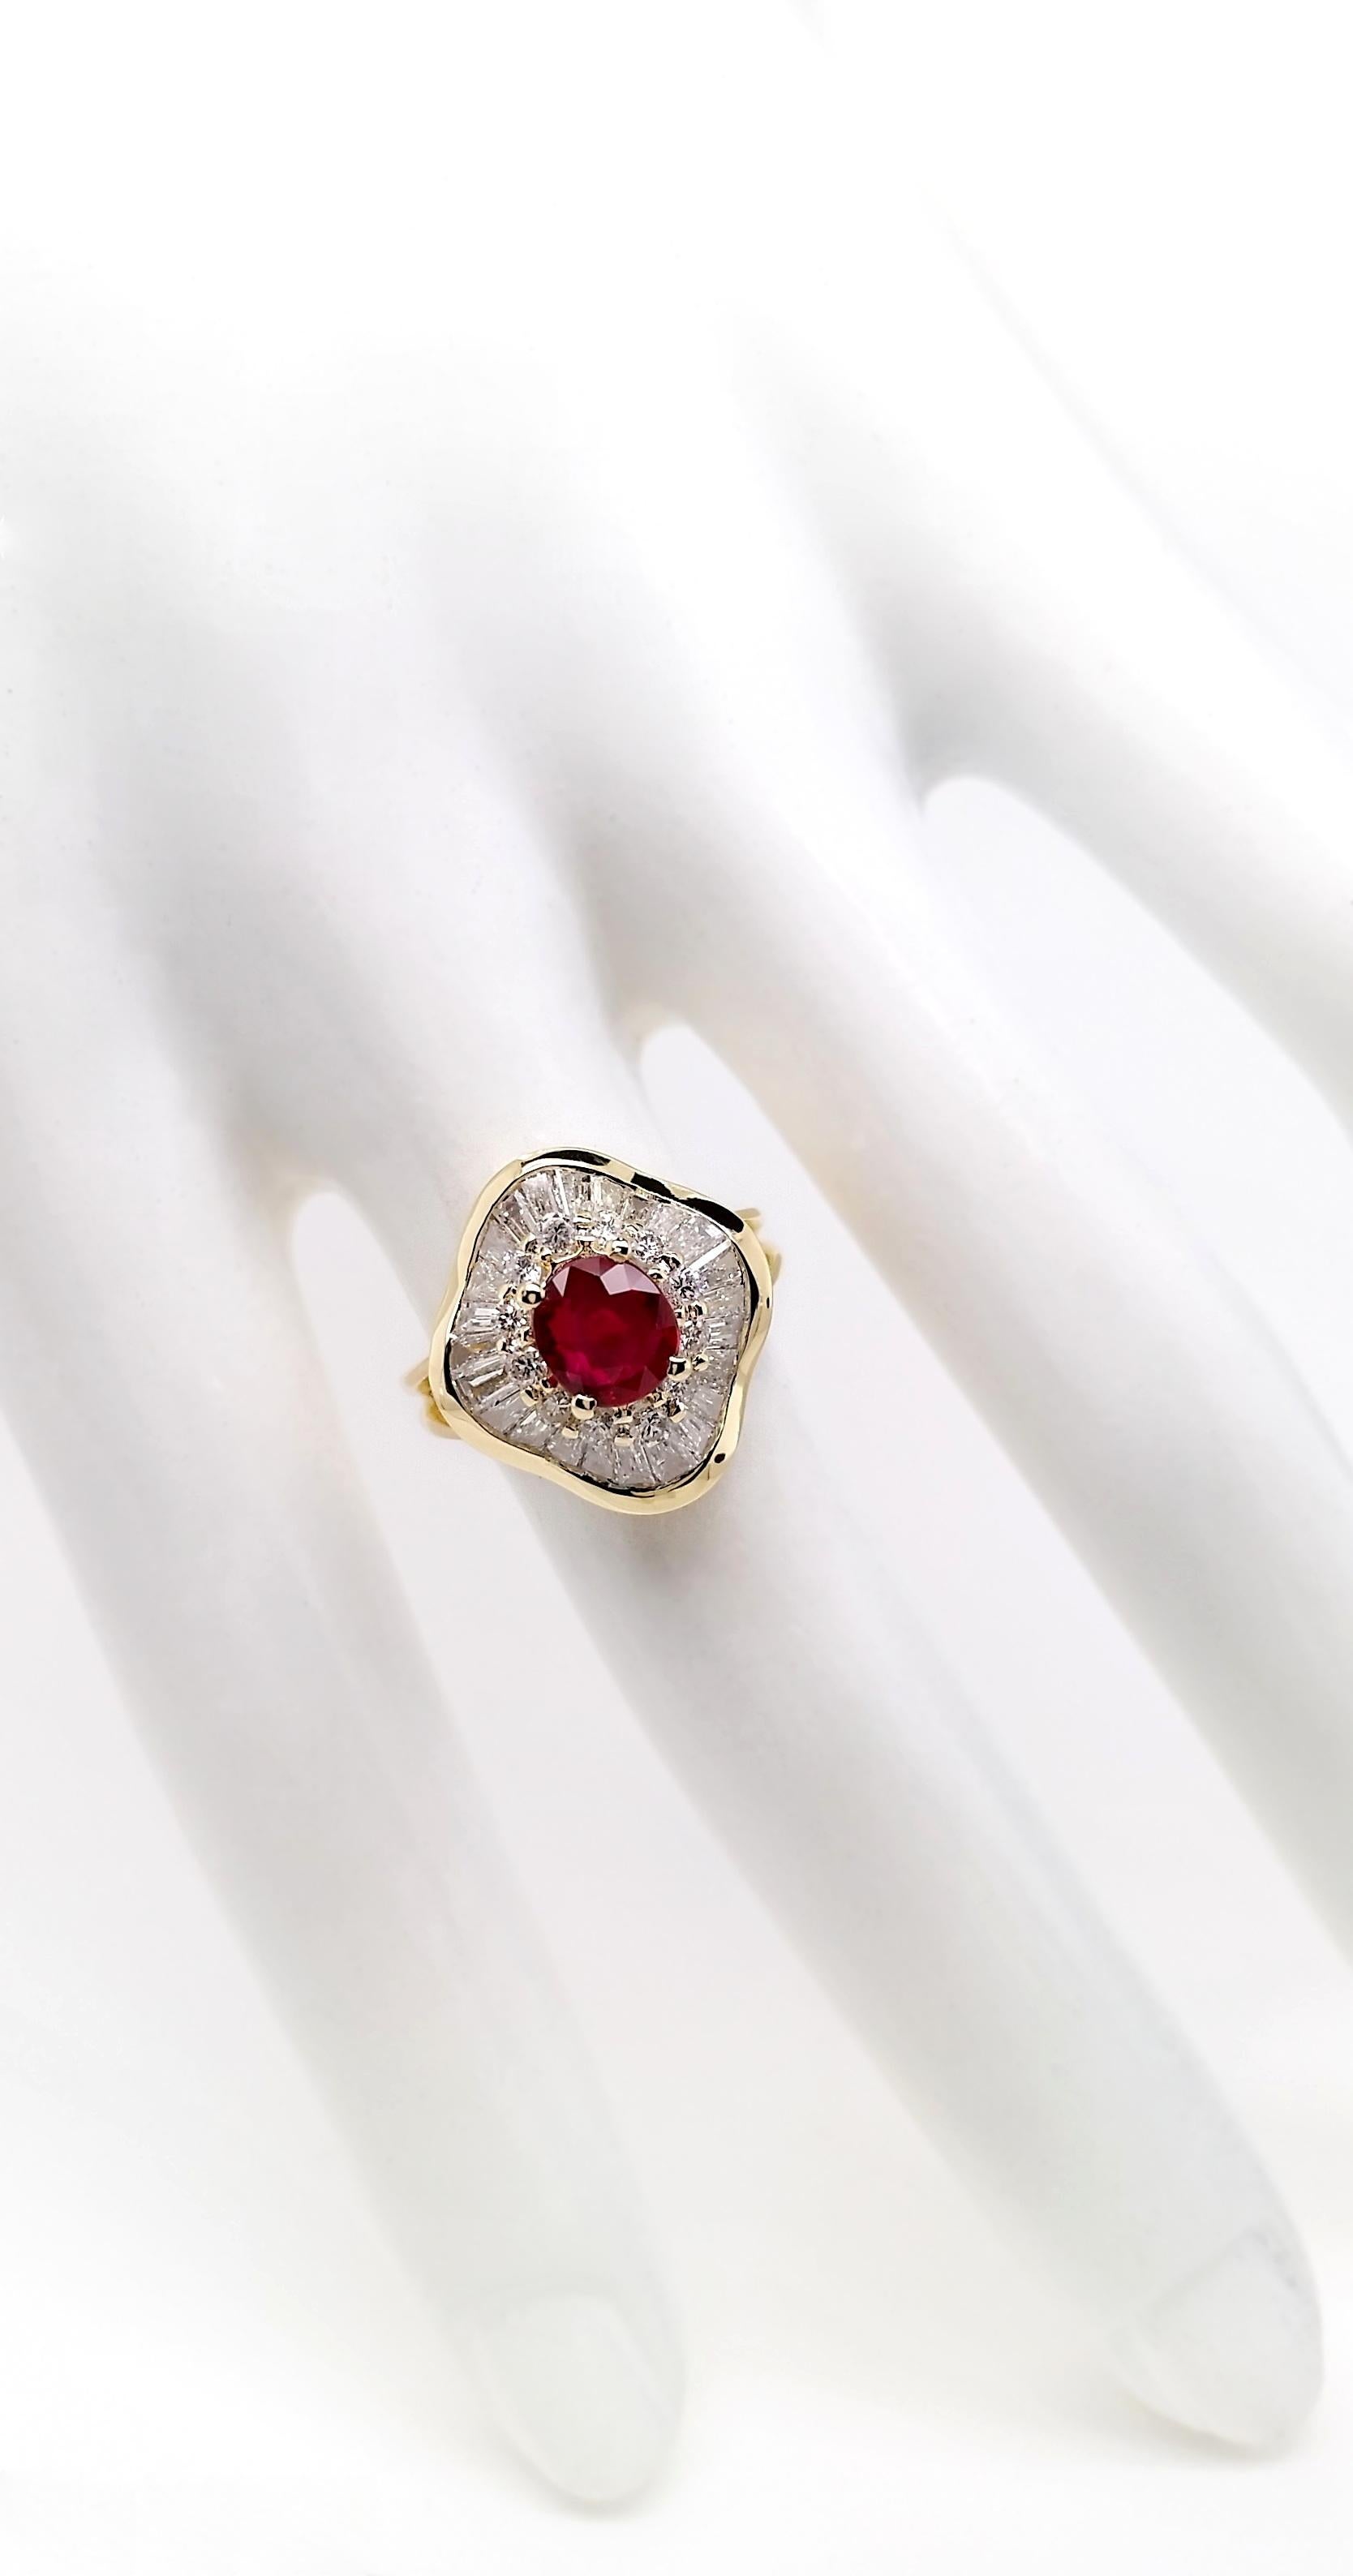 Oval Cut IGI Certified 1.01ct Vivid-Red Ruby and 1ct Diamonds 18k Yellow Gold Ring For Sale